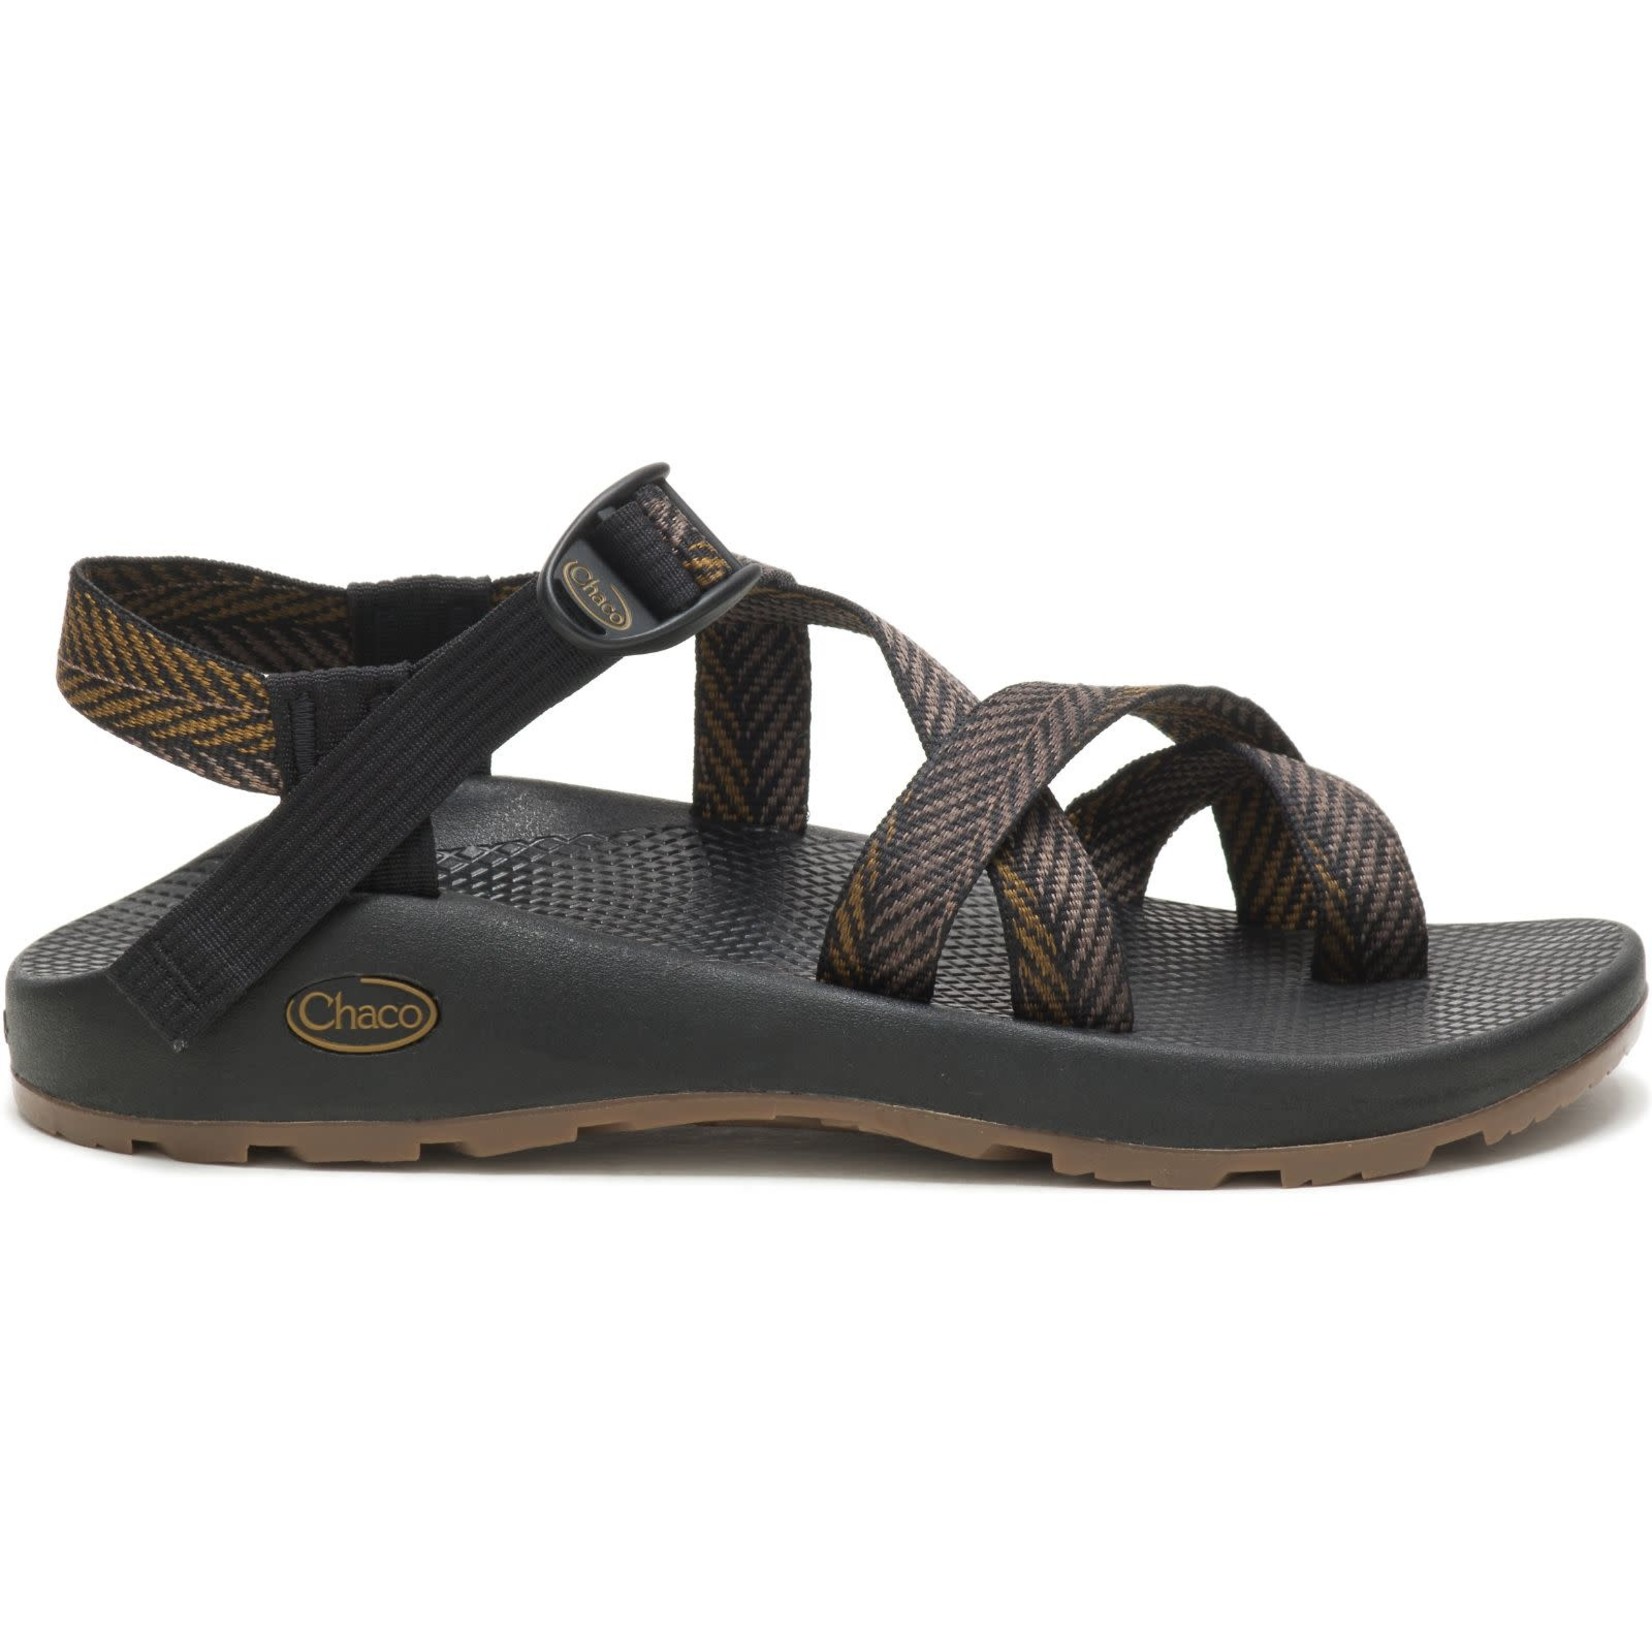 Chaco Chaco Men's Z/2 Classic Sandals